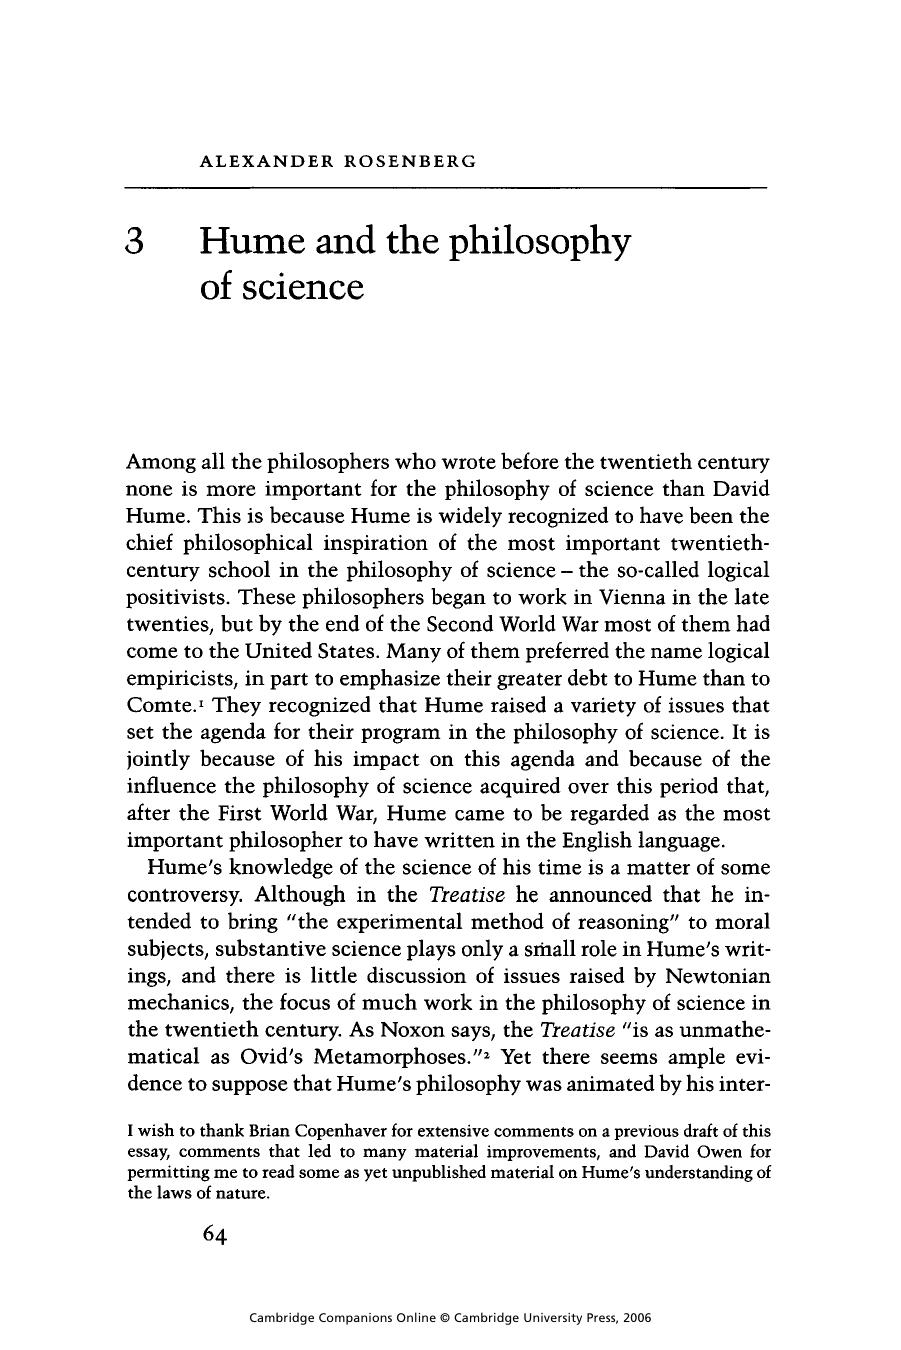 Hume and the philosophy of science - Paper